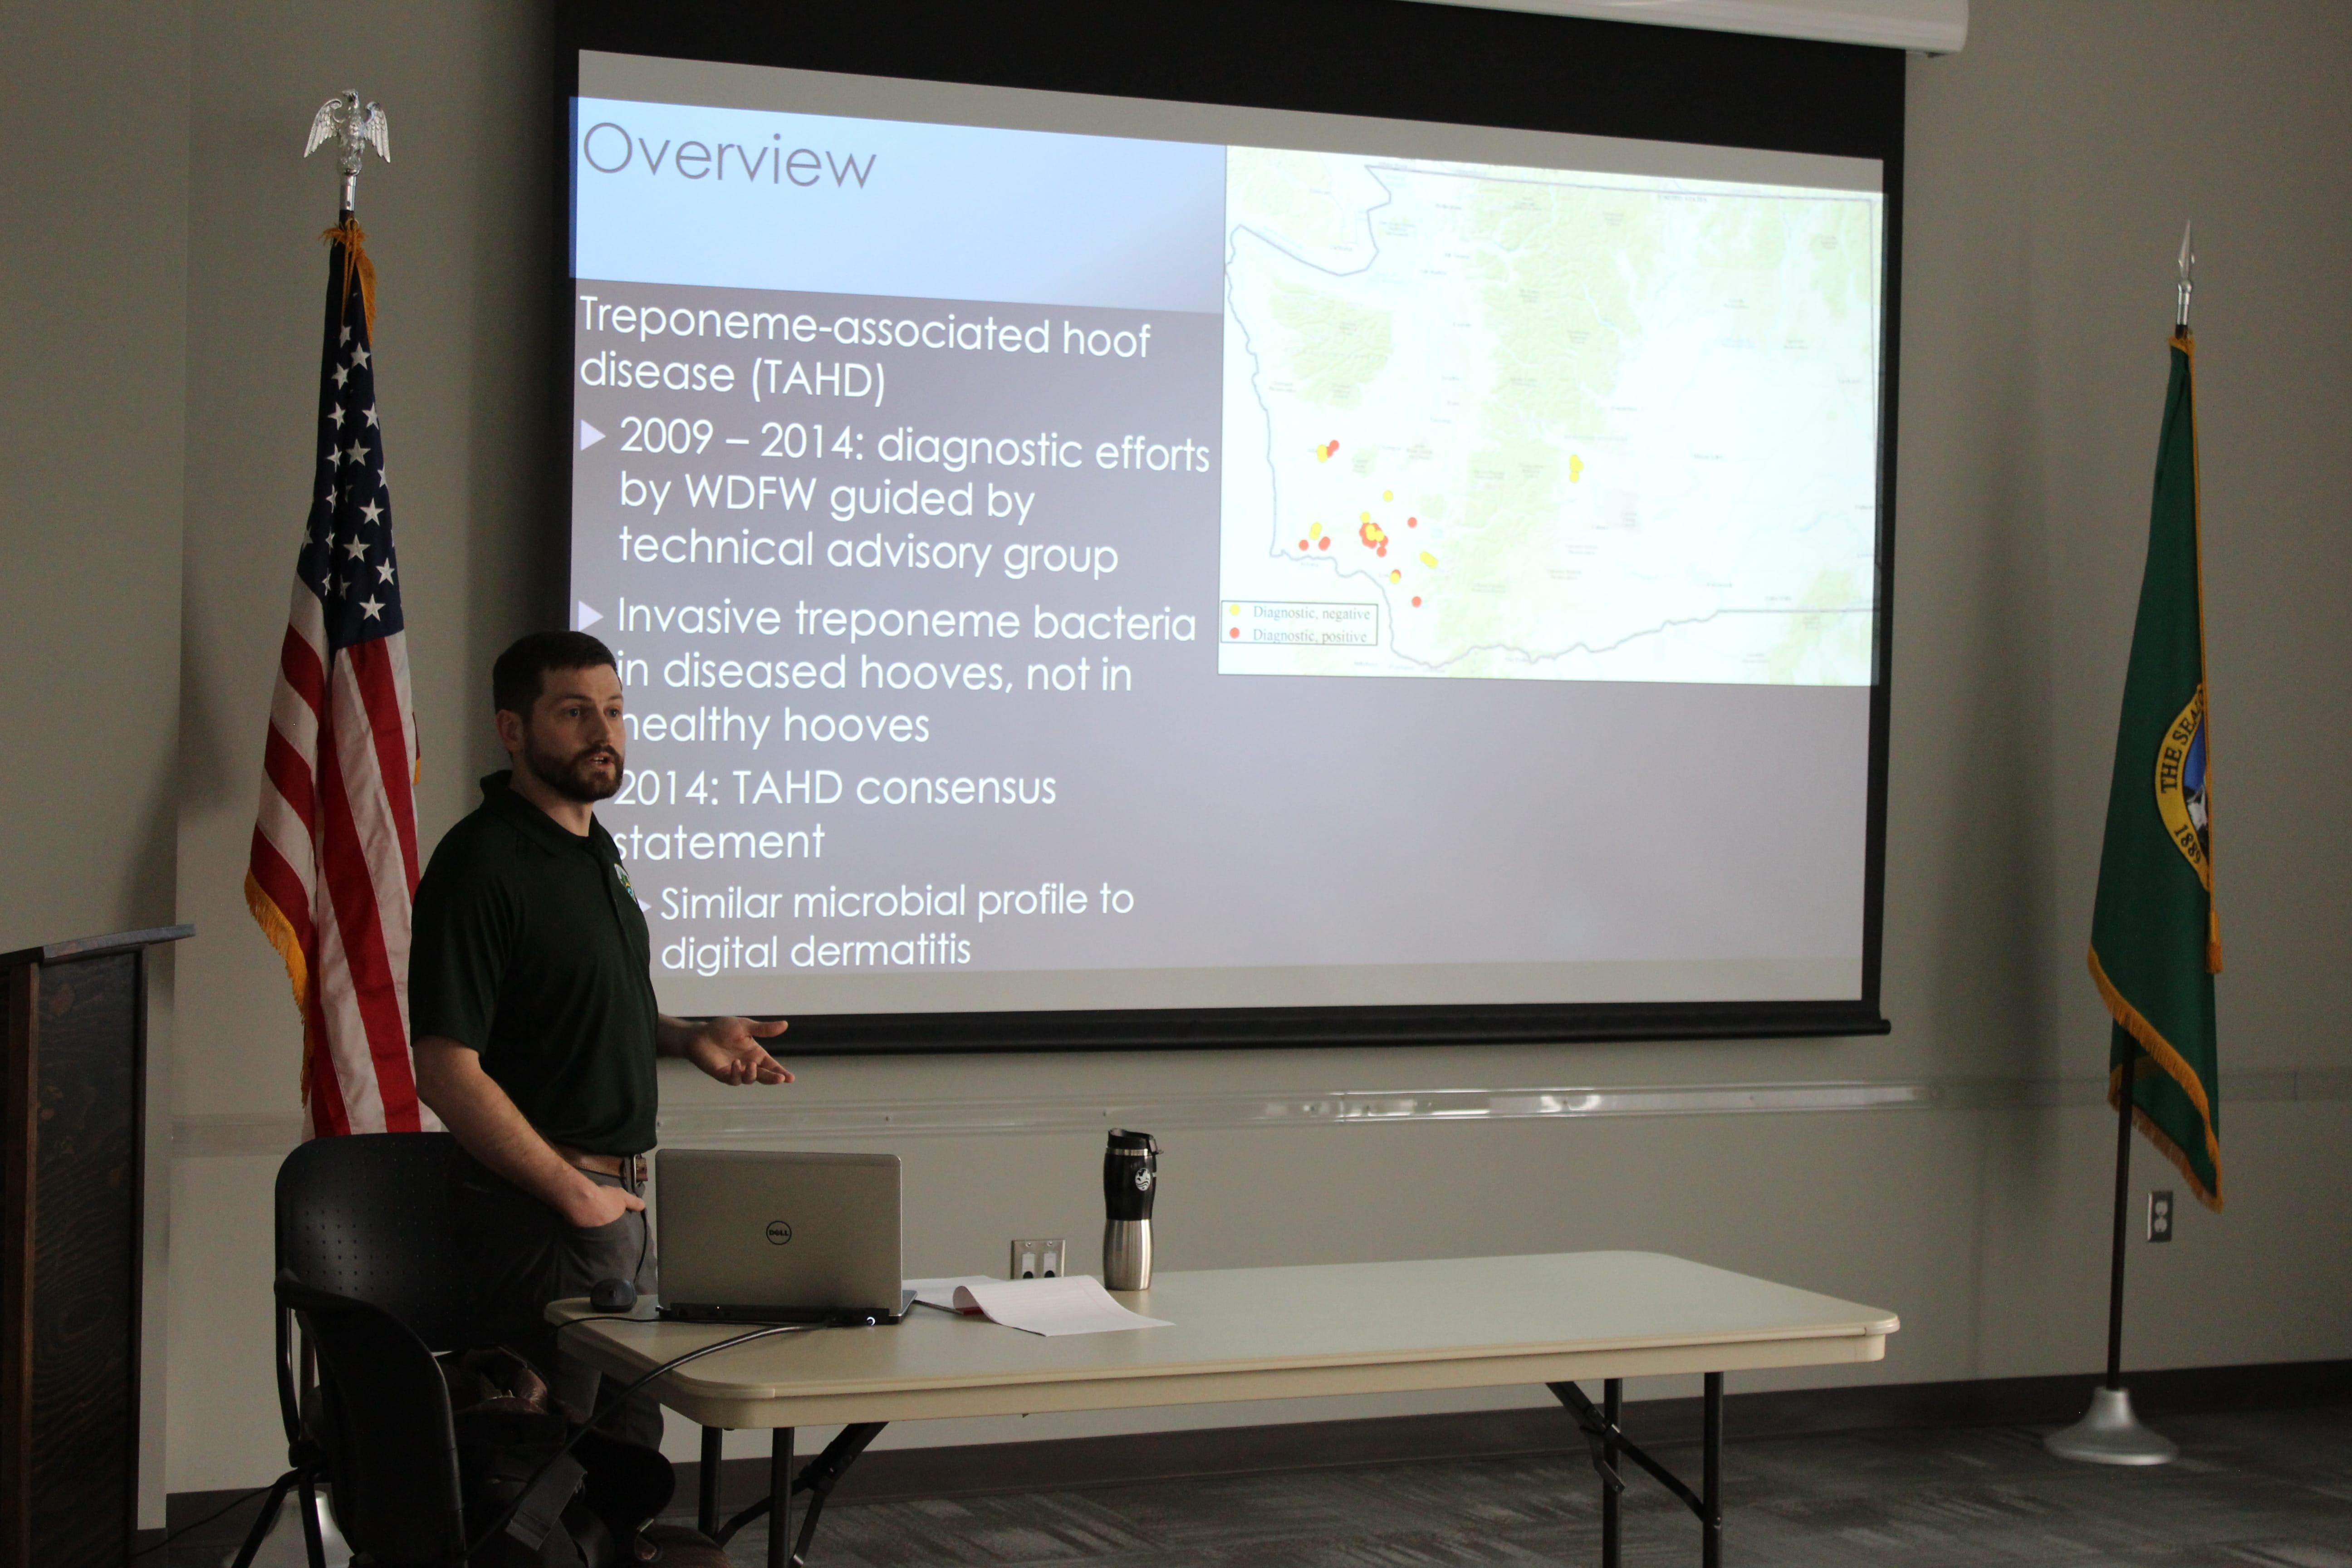 Eric Gardner, WDFW wildlife program director, explains to members of the public the recent discovery of elk infected with hoof disease in the Trout Lake Valley, and the department’s planned response.